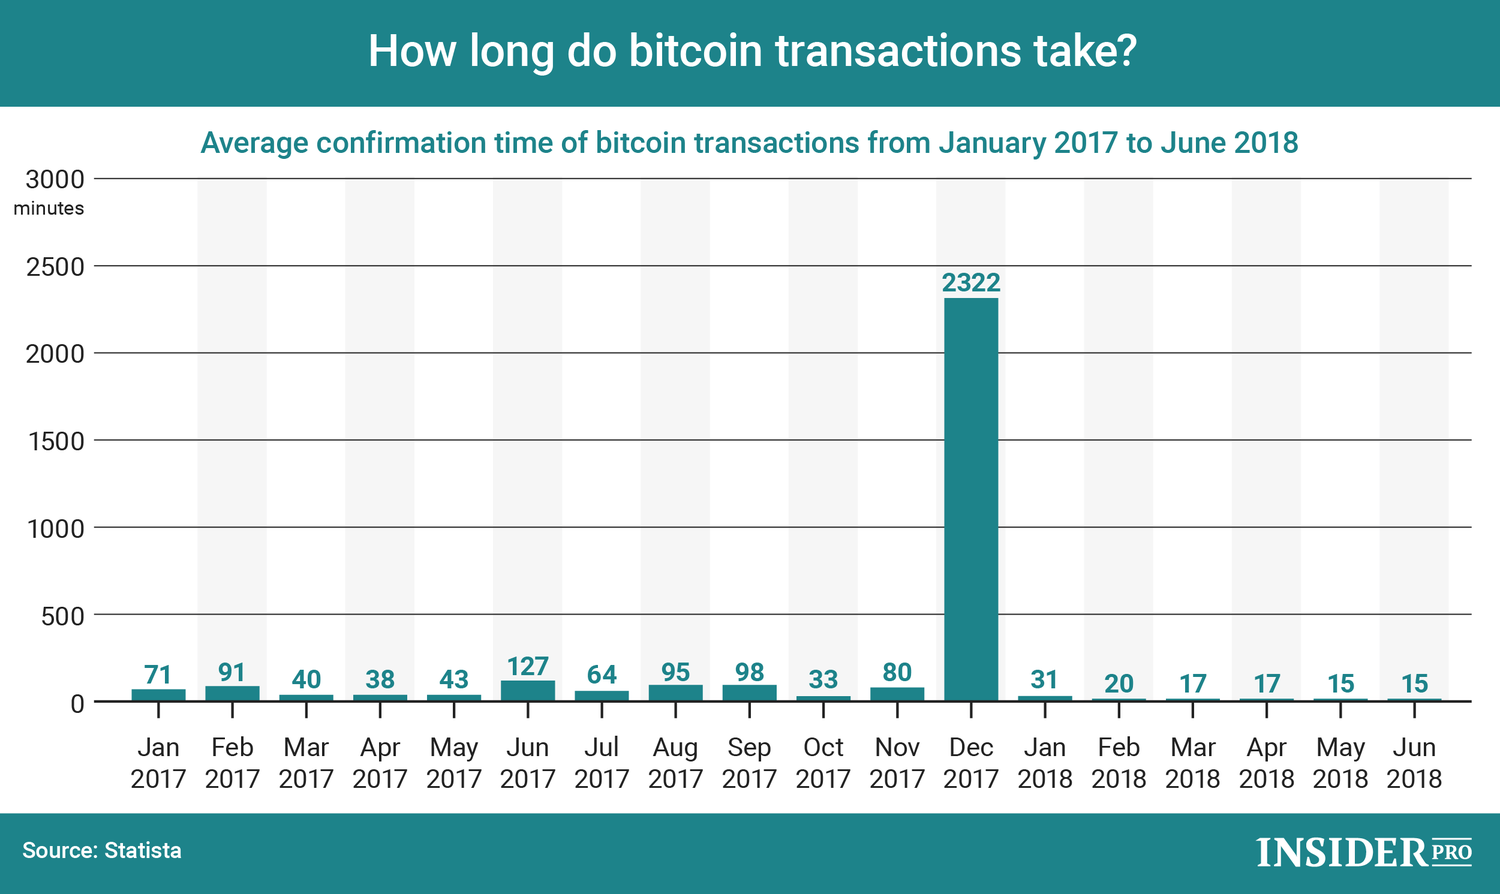 How Long Does Verification for Bitcoin Transactions Take?